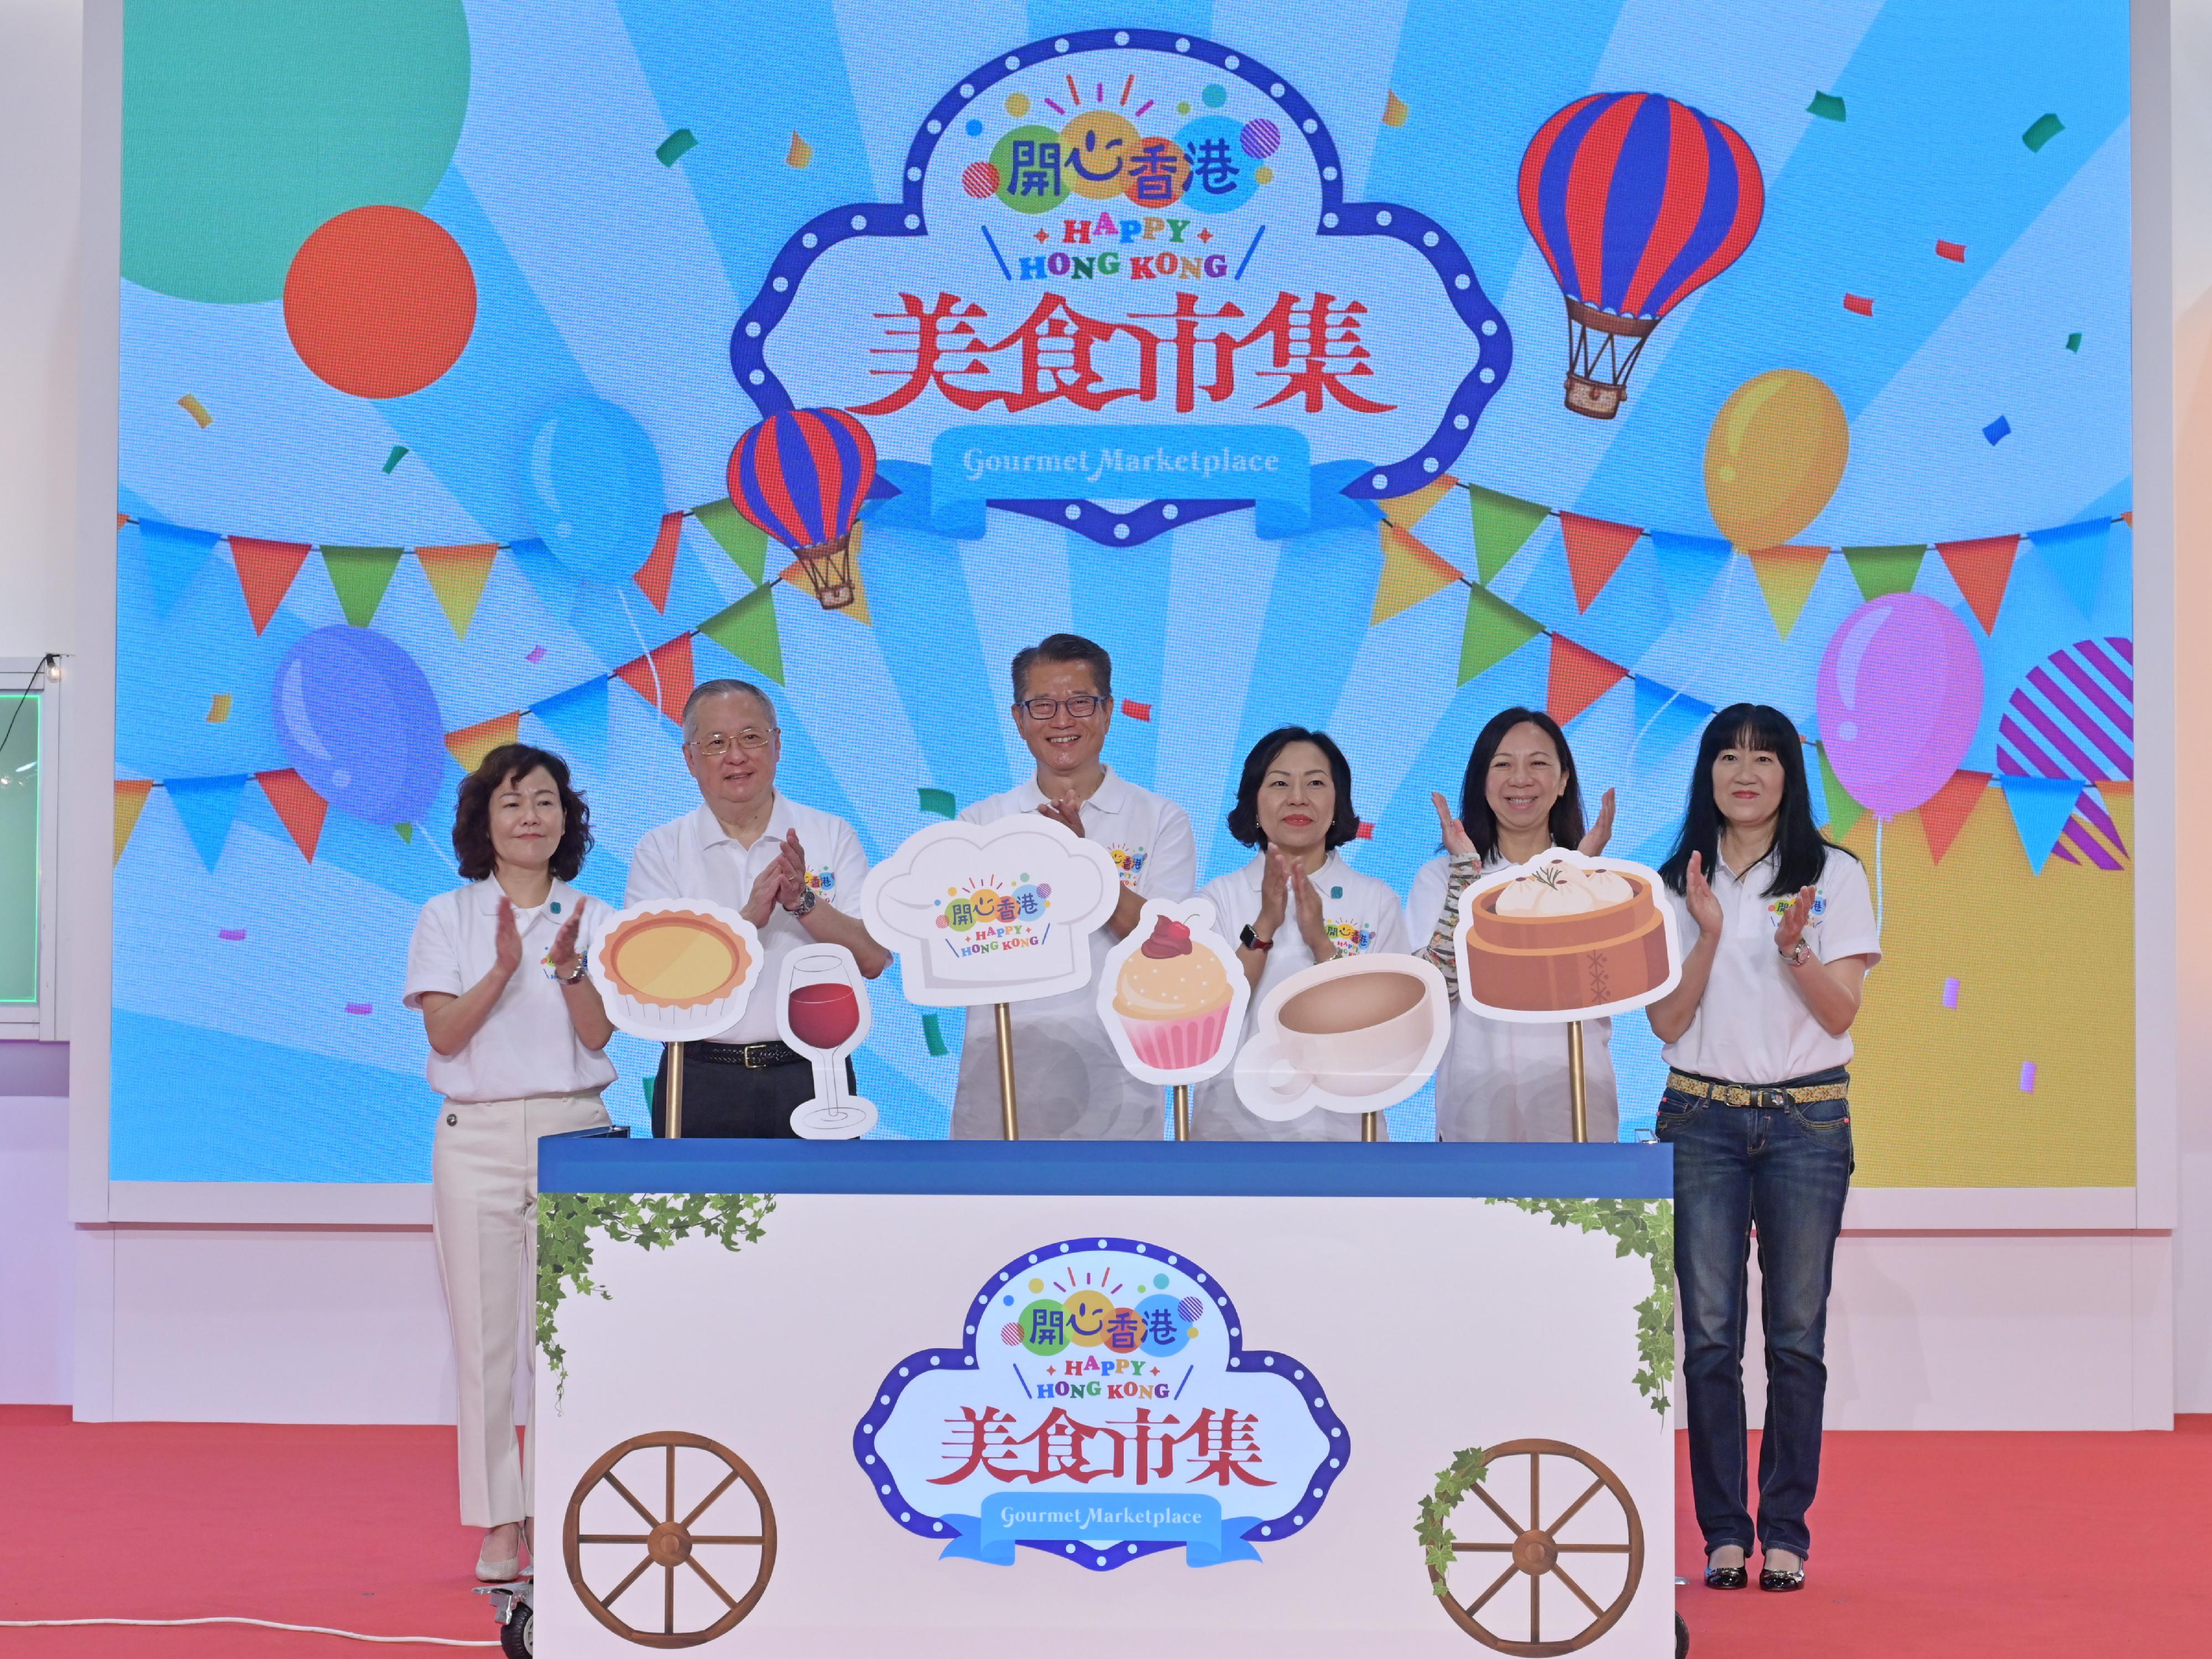 The Financial Secretary, Mr Paul Chan, officiated at the opening ceremony of the first "Happy Hong Kong" Gourmet Marketplace today (April 29). Photo shows (from left) the Director of Home Affairs, Mrs Alice Cheung; Non-official Member of the Executive Council, Legislative Council Member (Catering), Mr Tommy Cheung; Mr Chan; the Secretary for Home and Youth Affairs, Miss Alice Mak; the Permanent Secretary for Home and Youth Affairs, Ms Shirley Lam; and the Executive Director of the Hong Kong Trade Development Council, Ms Margaret Fong, officiating at the ceremony.